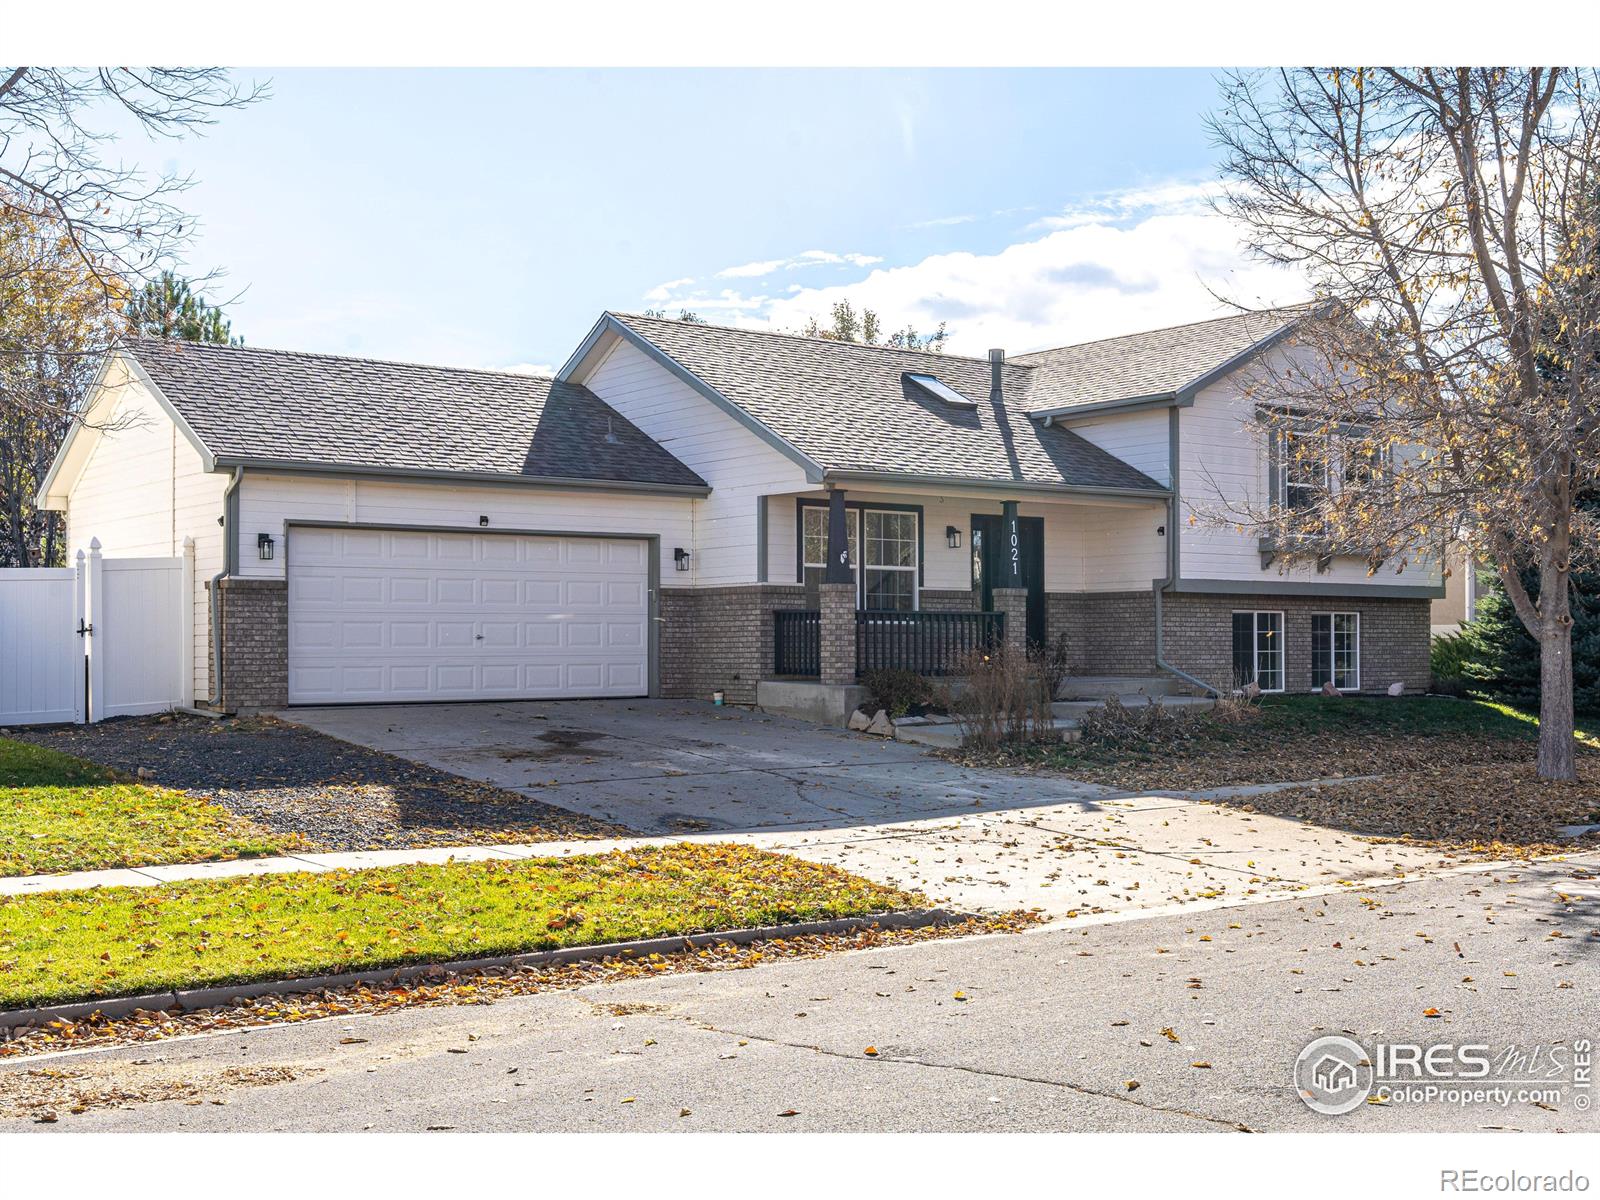 1021  jefferson drive, Berthoud sold home. Closed on 2024-03-22 for $520,000.